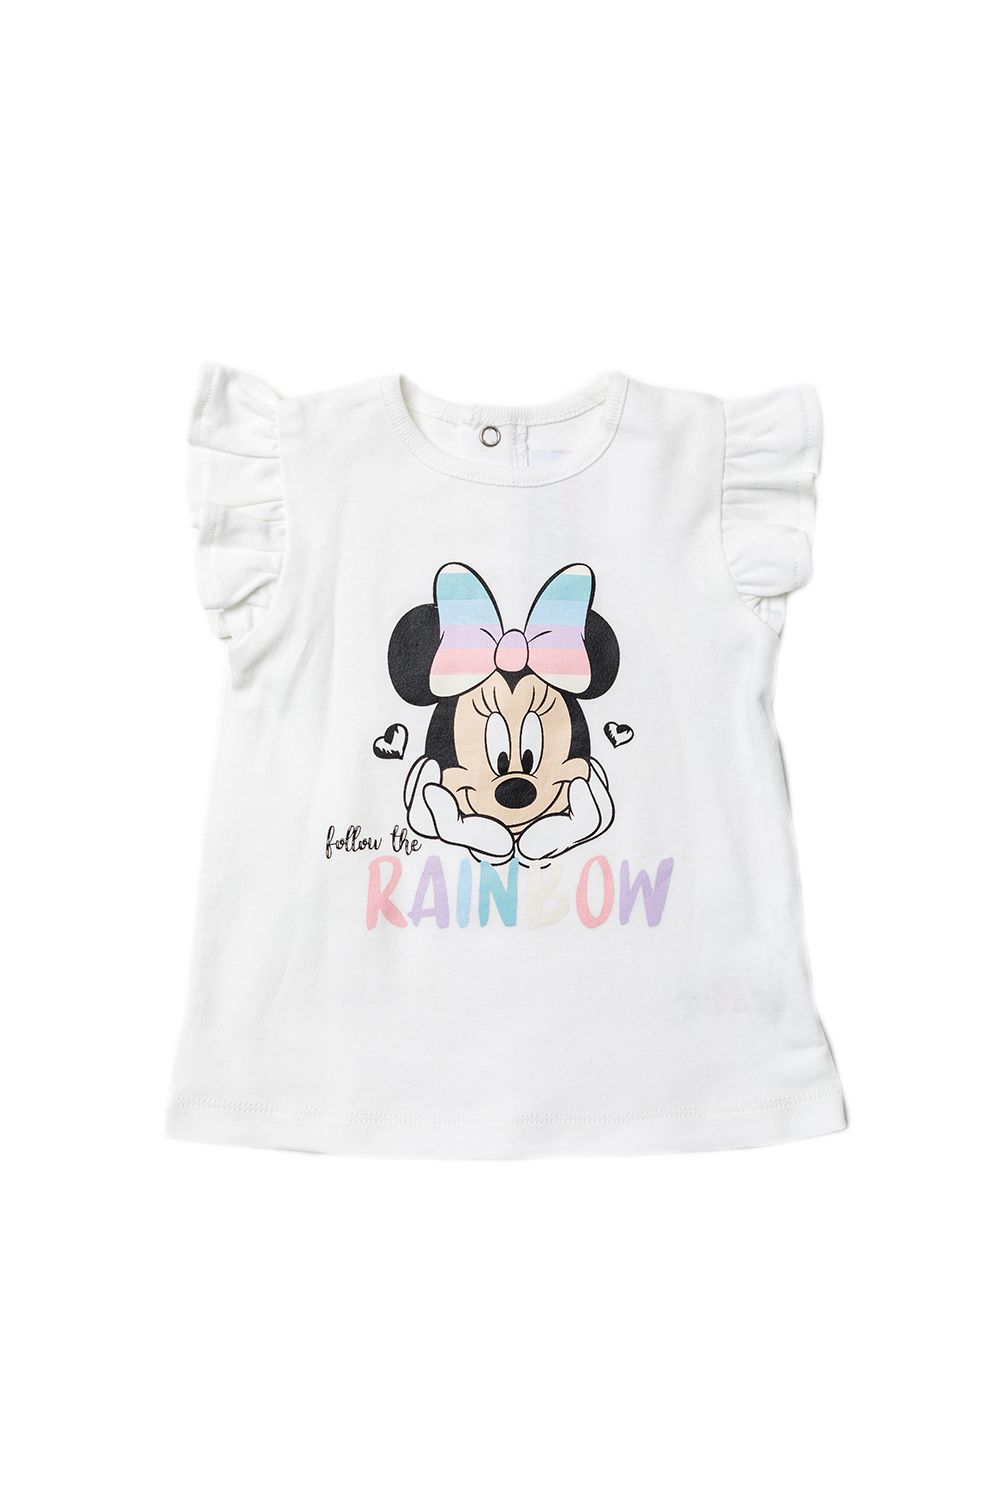 This adorable Disney Baby three-piece set features a rainbow themed Minnie Mouse print. The set includes a printed t-shirt, a pair of baby-pink, all-over print leggings and a matching headband! Each item in the set is cotton, keeping your little one comfortable. This would be a lovely gift or addition to your little ones wardrobe!